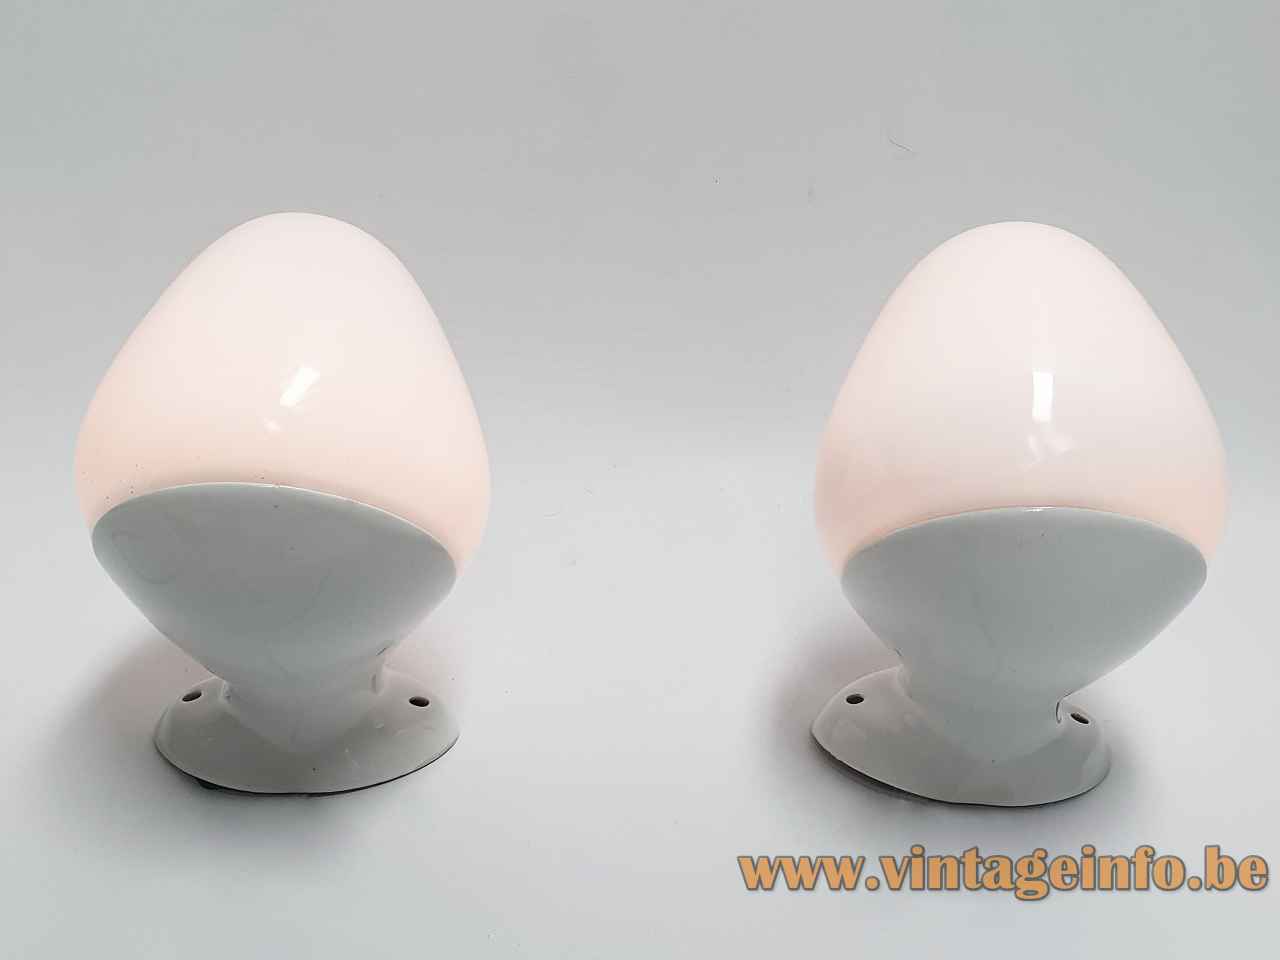 Wagenfeld WV 343 wall lamp white porcelain base mount opal glass lampshade 1950s 1960s Lindner pair